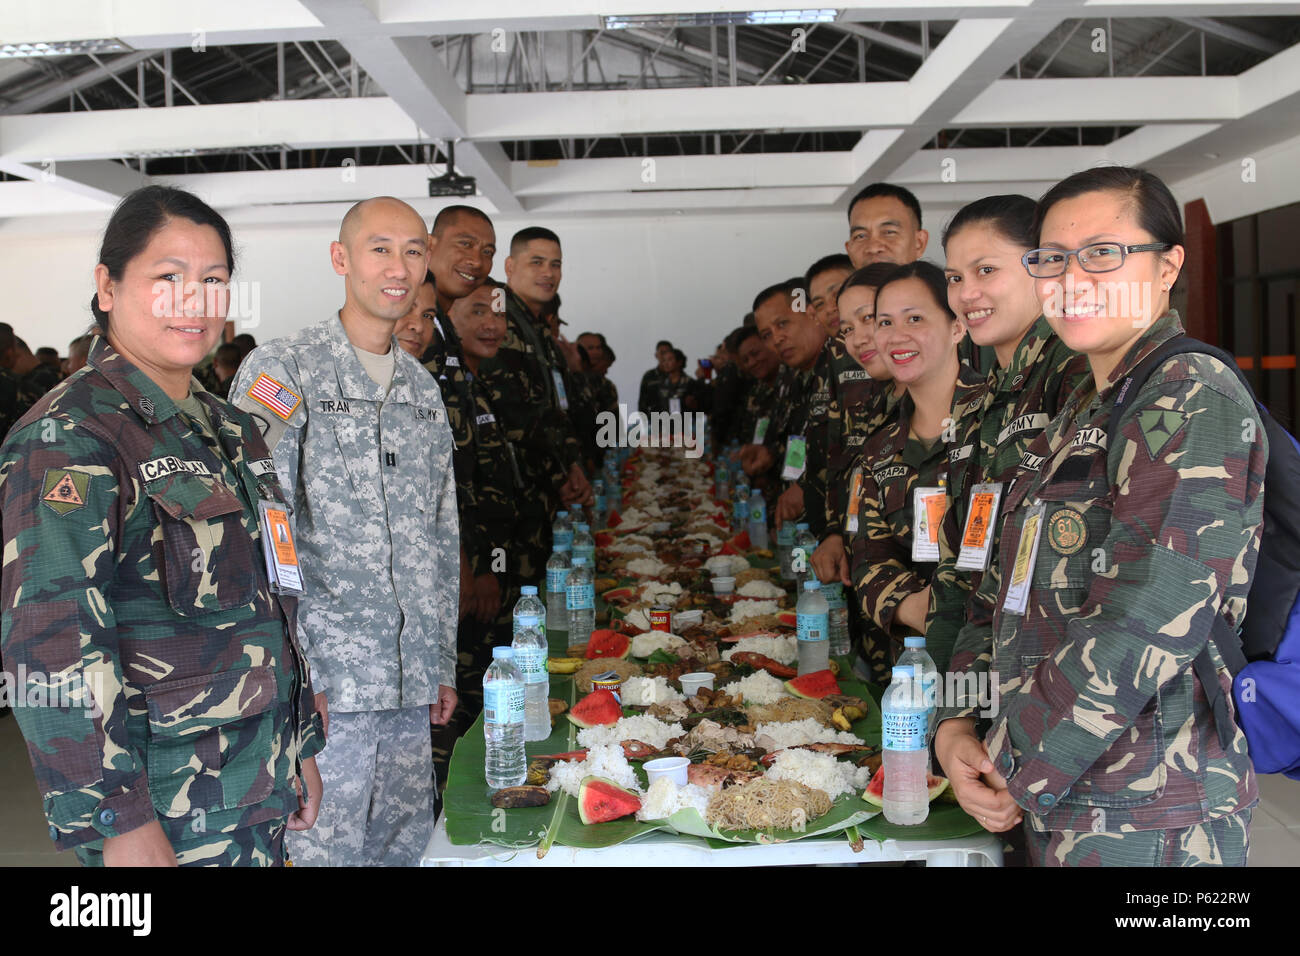 U.S. Army Reserve Cpt. Kevin K. Tran, 303rd Maneuver Enhancement Brigade, operations officer in charge in support of Balikatan 2016 CJCMOTF, and service members of the Armed Forces of the Philippines (AFP) pose for a photo before a “Boodle Fight” following the viewing at Camp Peralta, Capiz, Philippines, of a video memoir of the historical Bataan Death March of 1942, April 09, 2016. The viewing followed a flag raising ceremony. The ceremony was one of many that have brought together the AFP and U.S. military during the Balikatan 2016, “shoulder to shoulder”, exercise. Balikatan is an annual bi Stock Photo